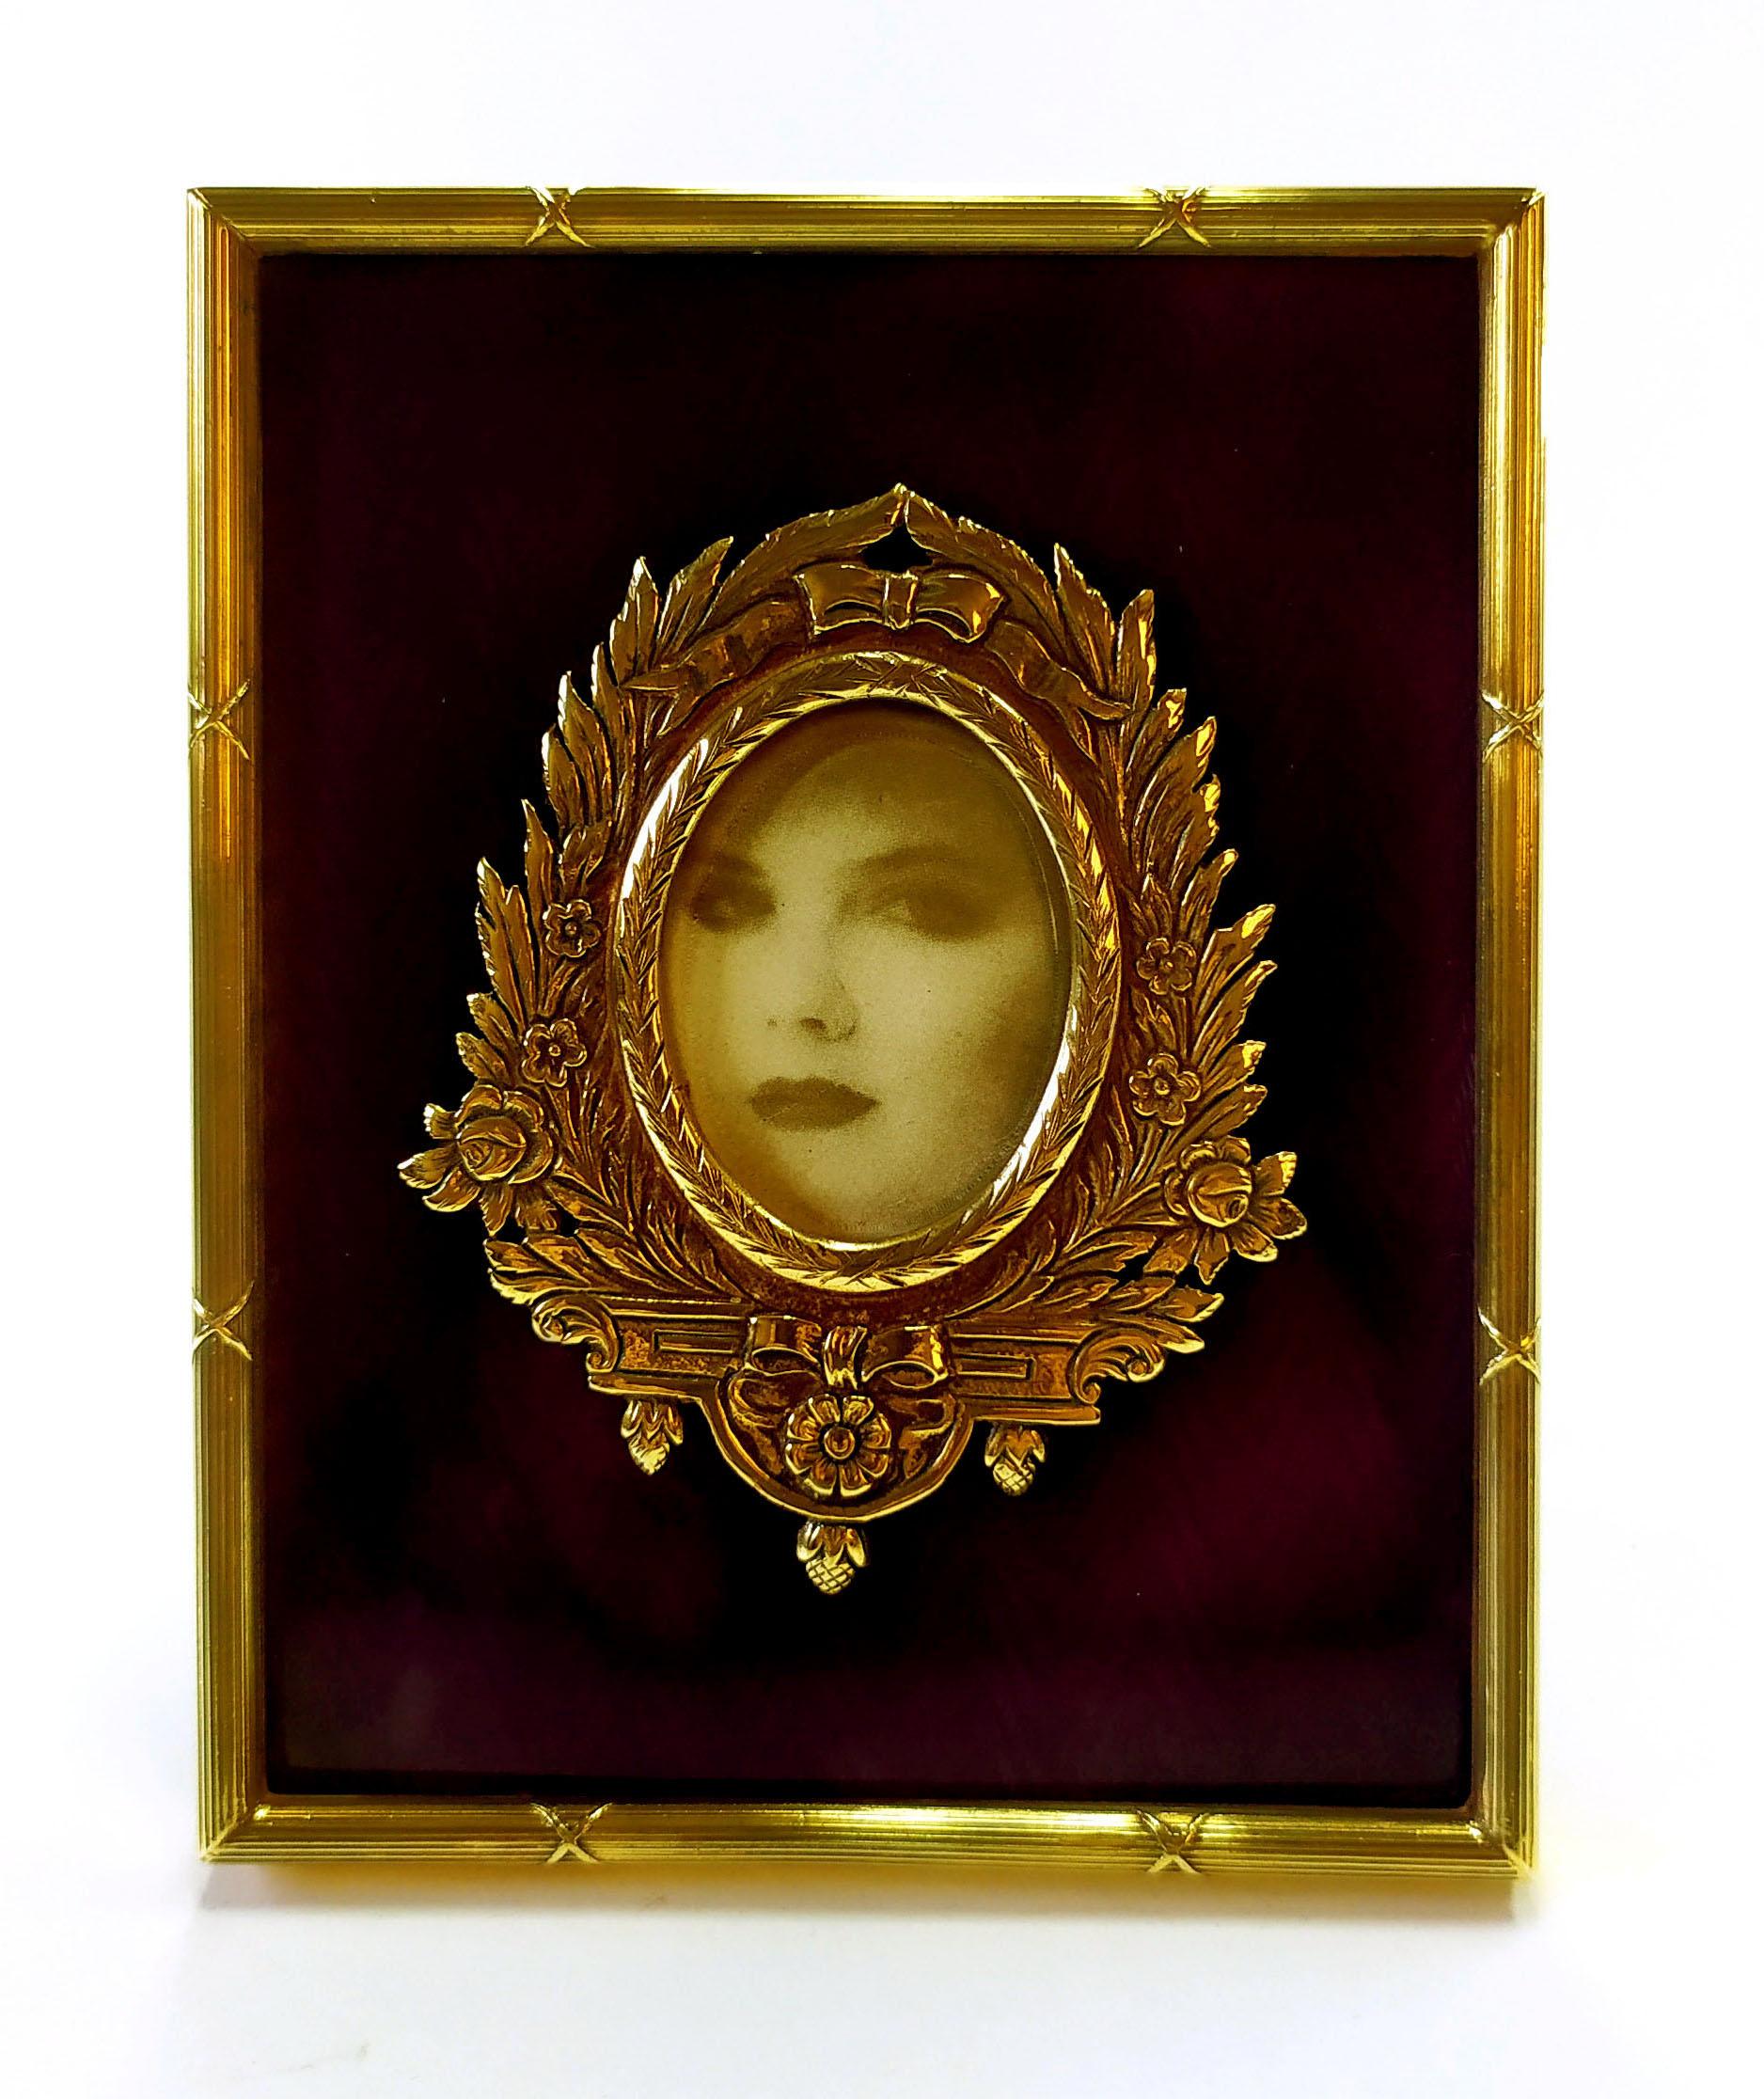 Rectangular table frame for oval photos cm. 3 x 4 in 925/1000 sterling silver gold plated with translucent fired enamel, plum purple, on guilloche, with French Empire Louis XVI style borders and ornaments, 18th century. External cm. 10.2 x 11.7.